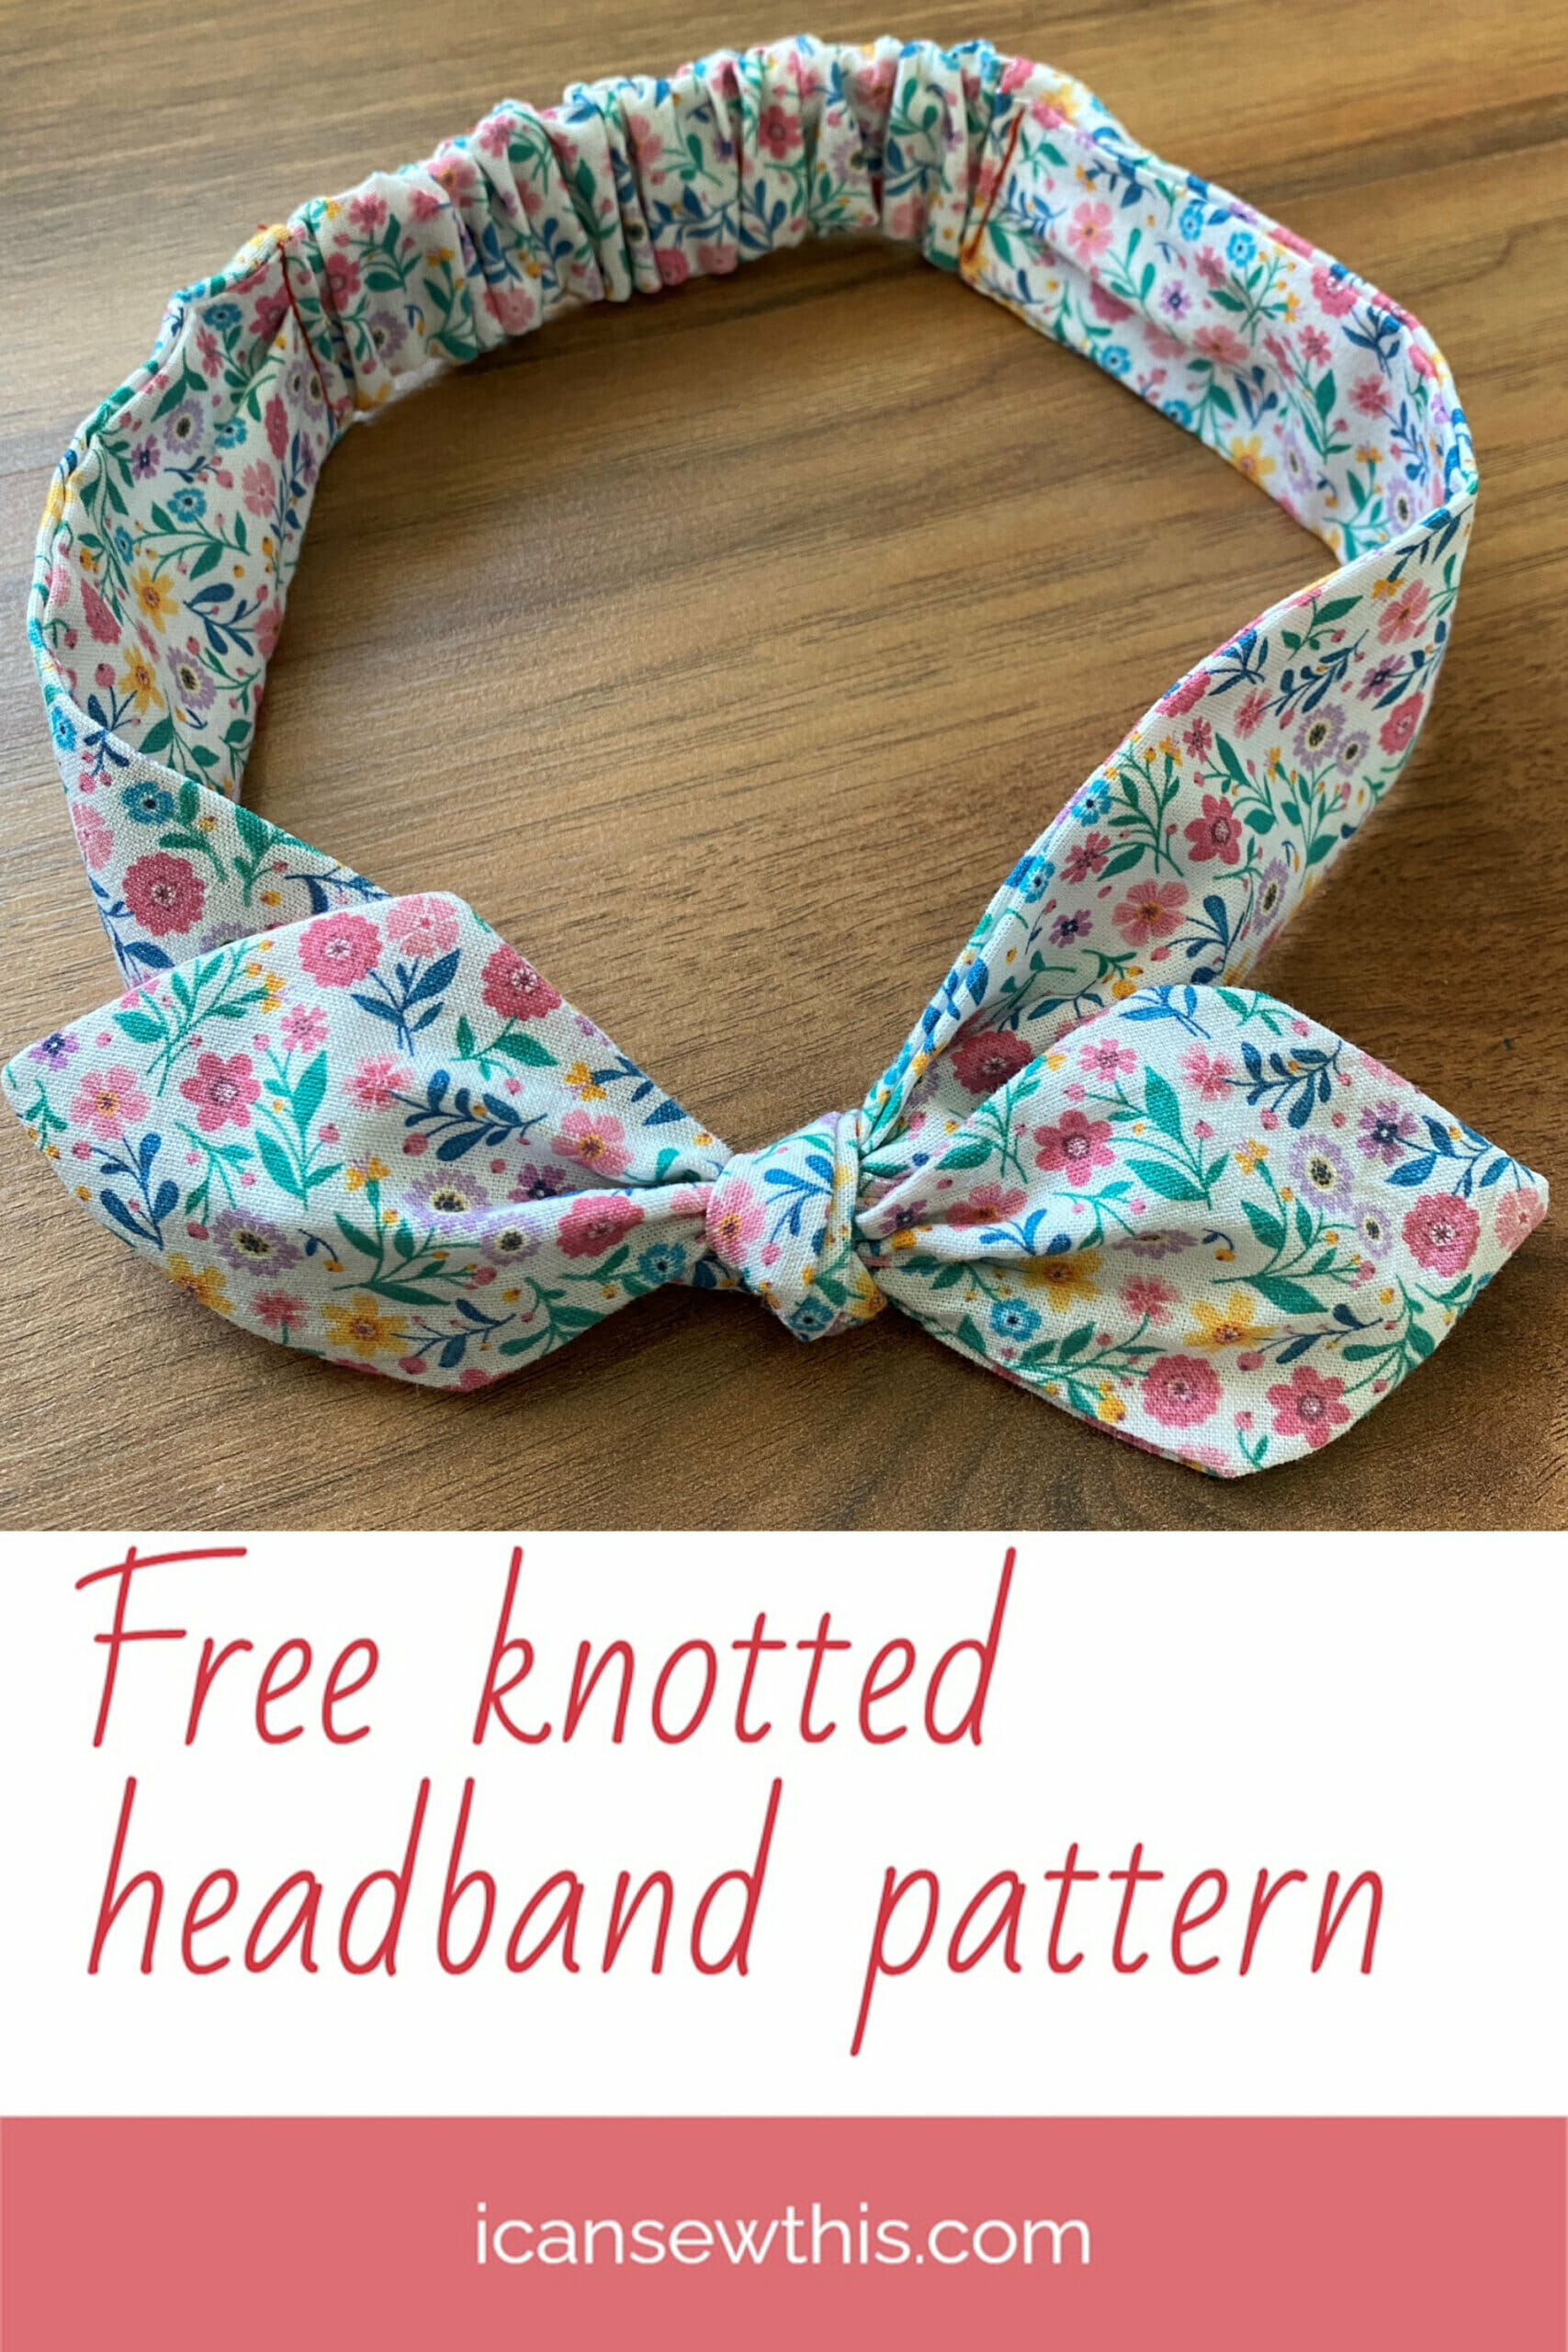 How to make a knotted headband. Free pattern & tutorial - I Can Sew This